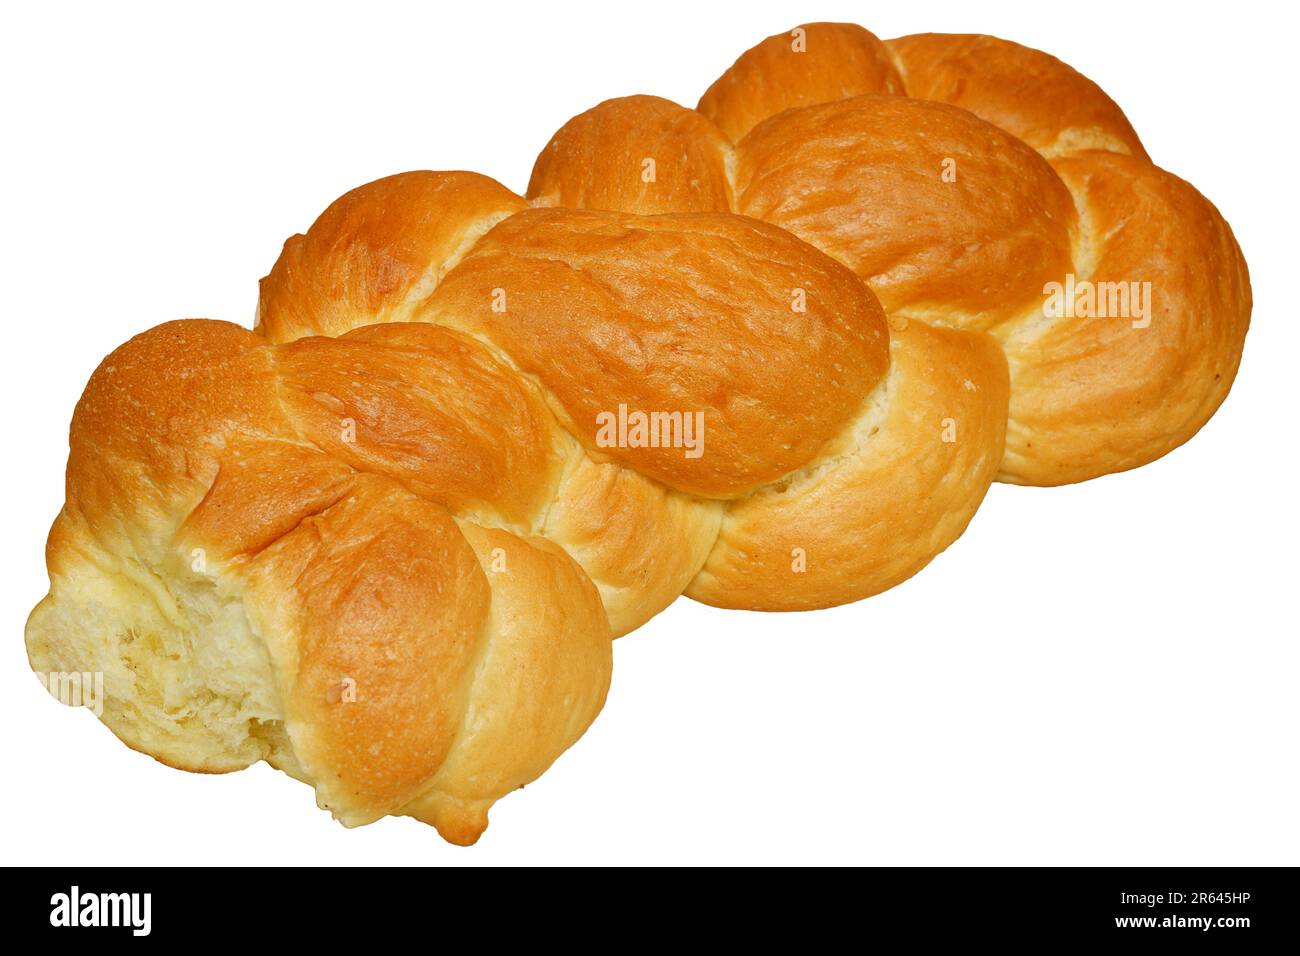 File:Challah bread on a pan.jpg - Wikimedia Commons